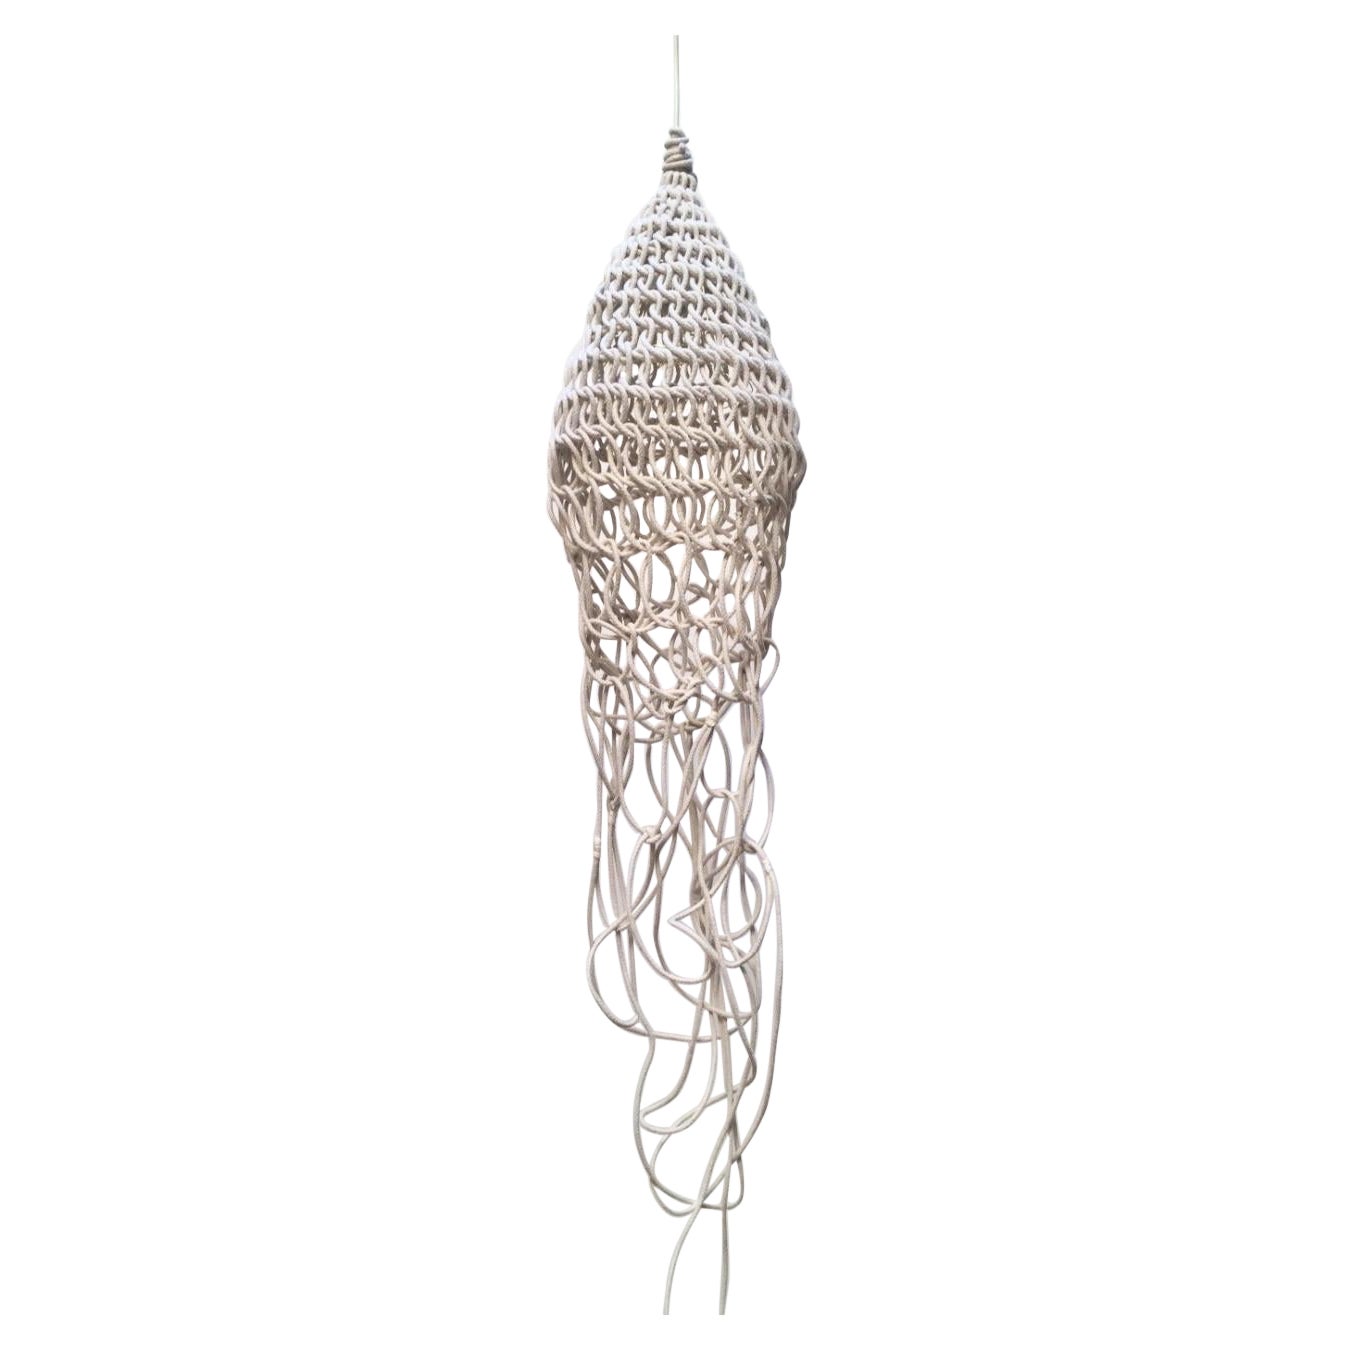 Medusa Sculptural Lamp Hand Crocheted by Annie Legault Amulette For Sale